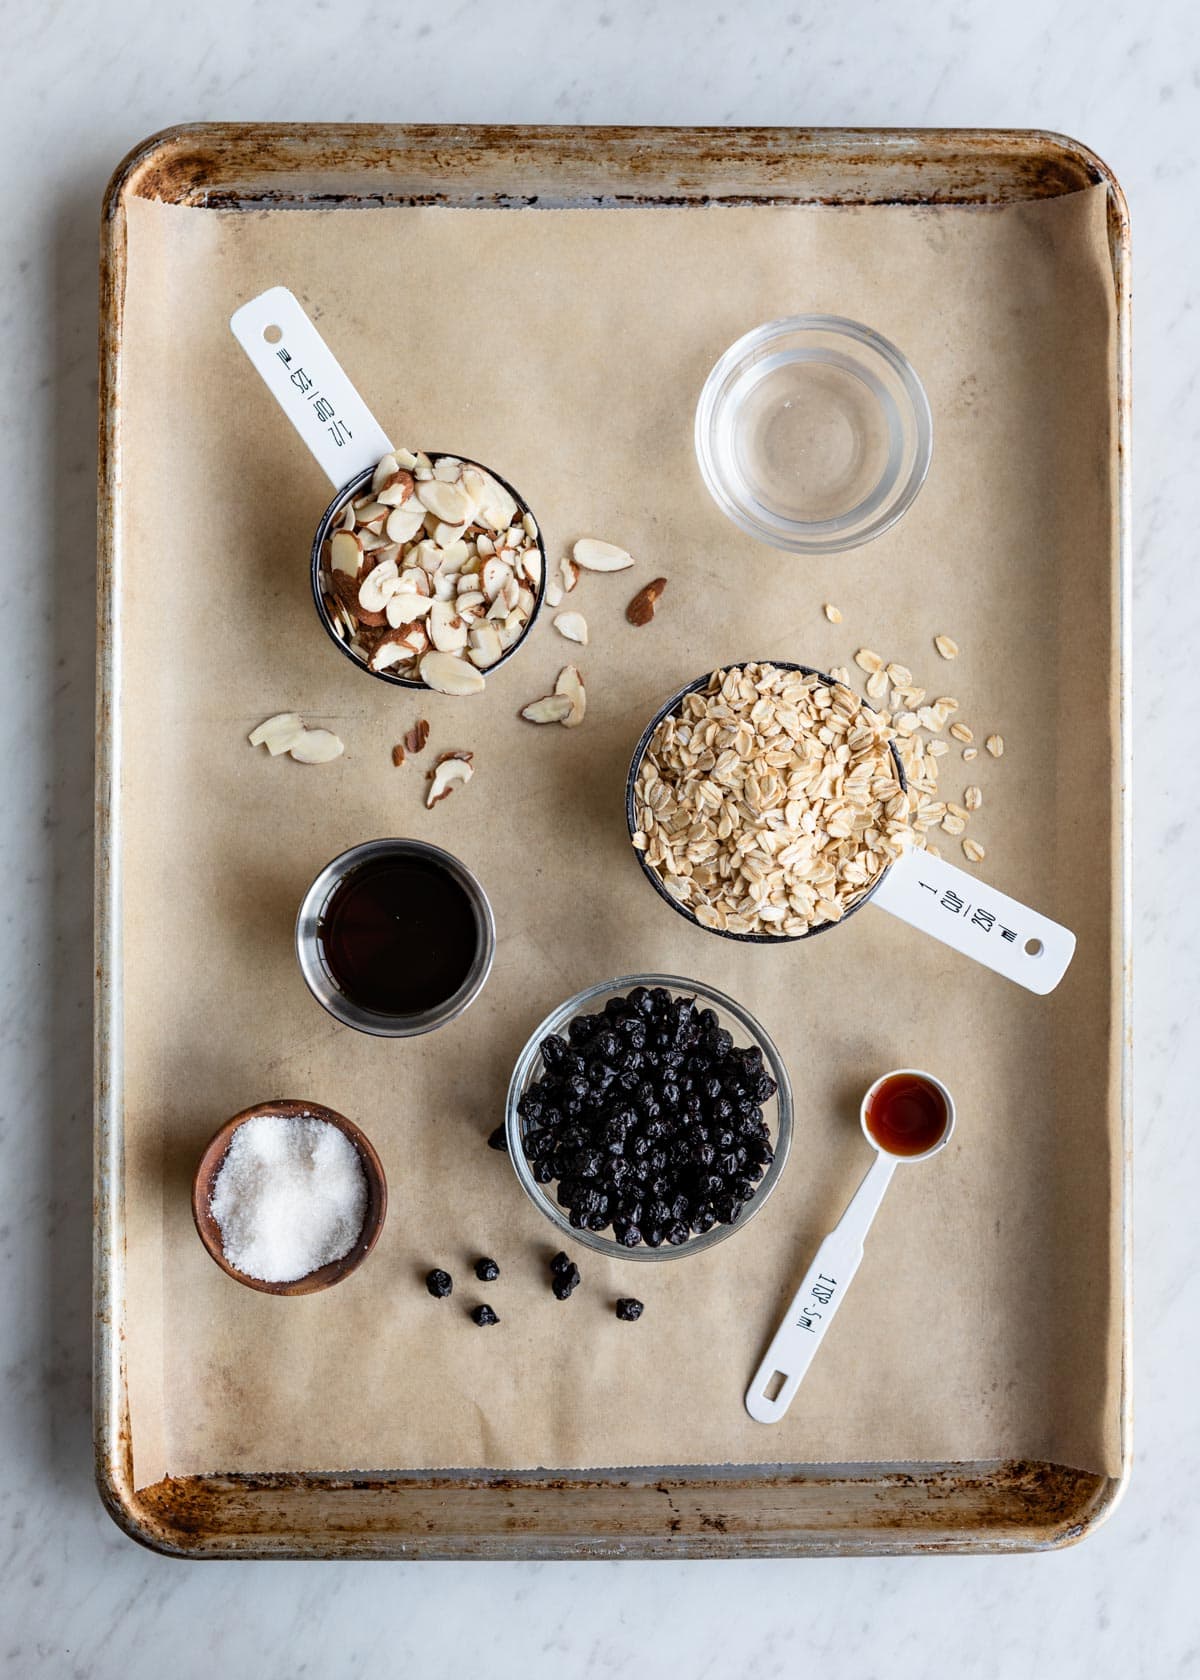 ingredients for gluten-free snack including coconut oil, sliced almonds, rolled oats, maple syrup, dried blueberries, sea salt and vanilla.